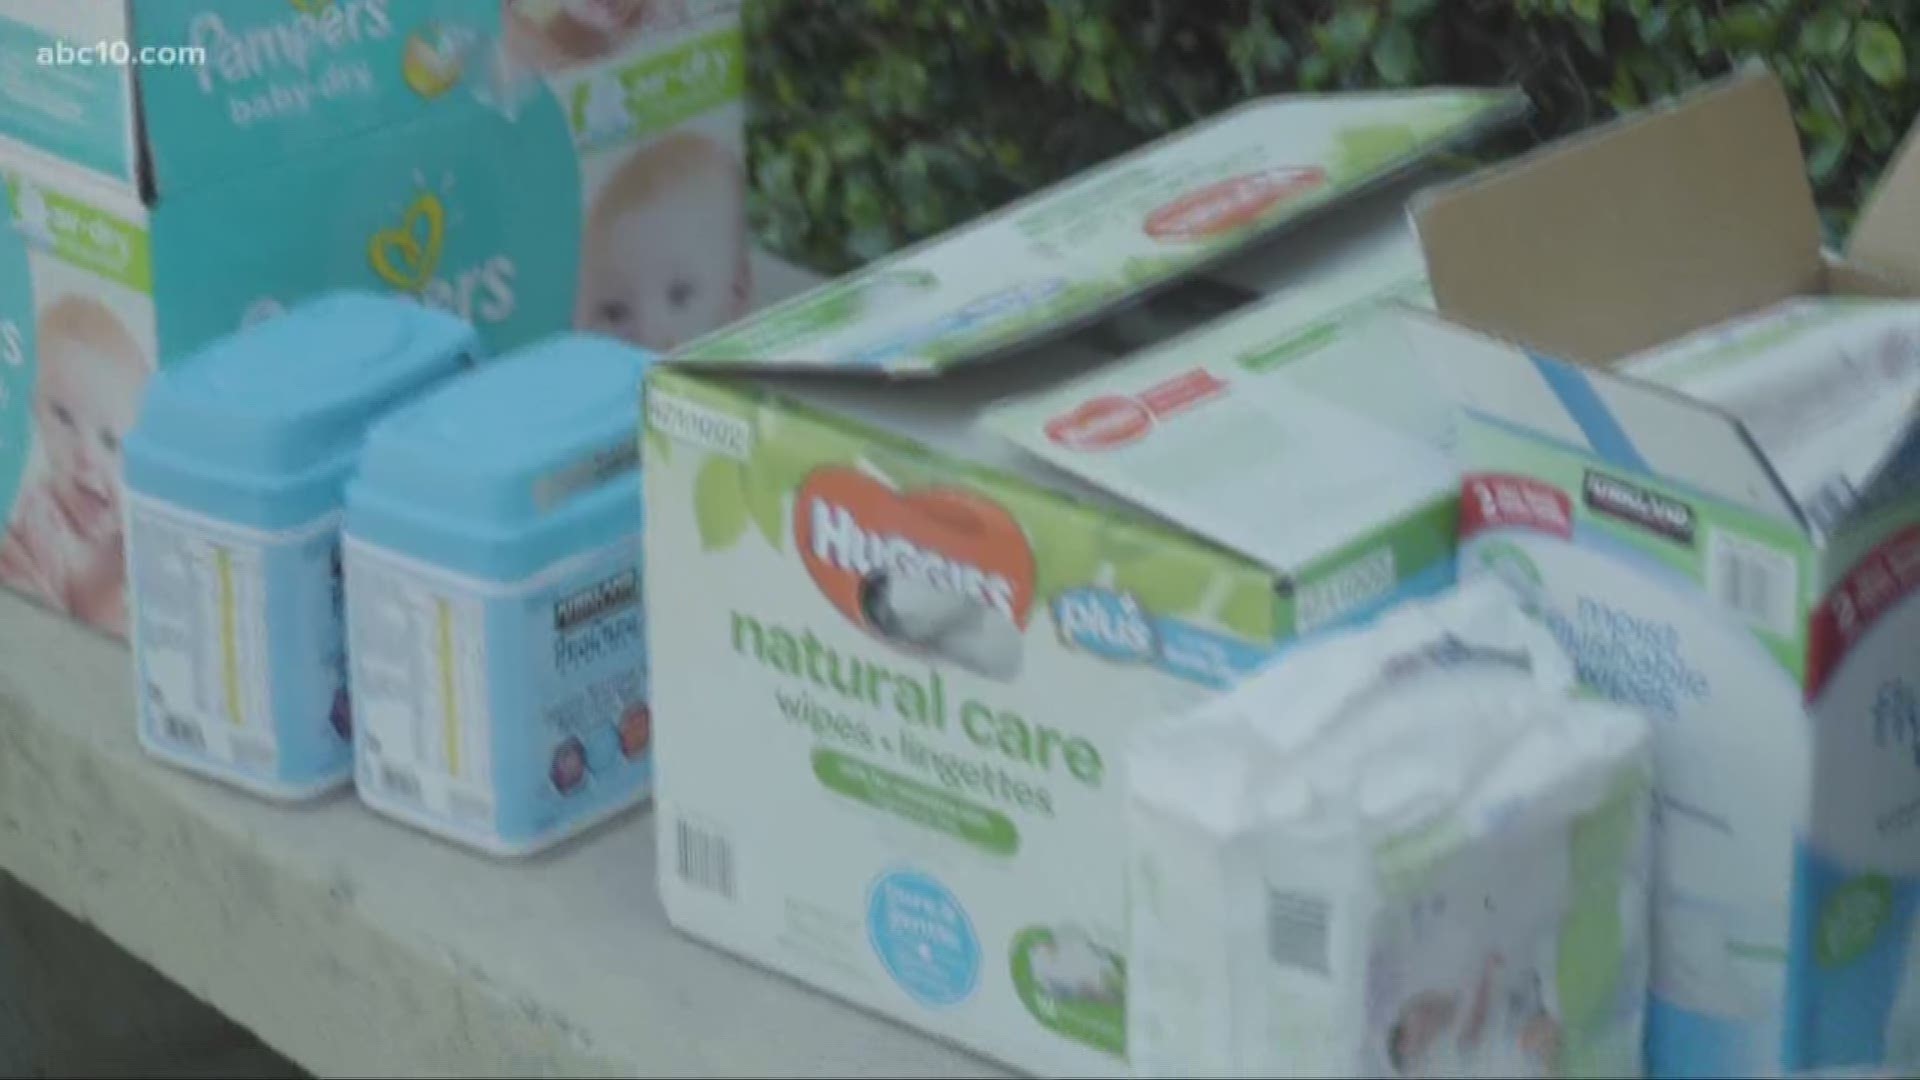 While store shelves are empty of baby products as people stock up in fear of coronavirus, a Sutter Health doctor is handing them out curbside in Stockton.